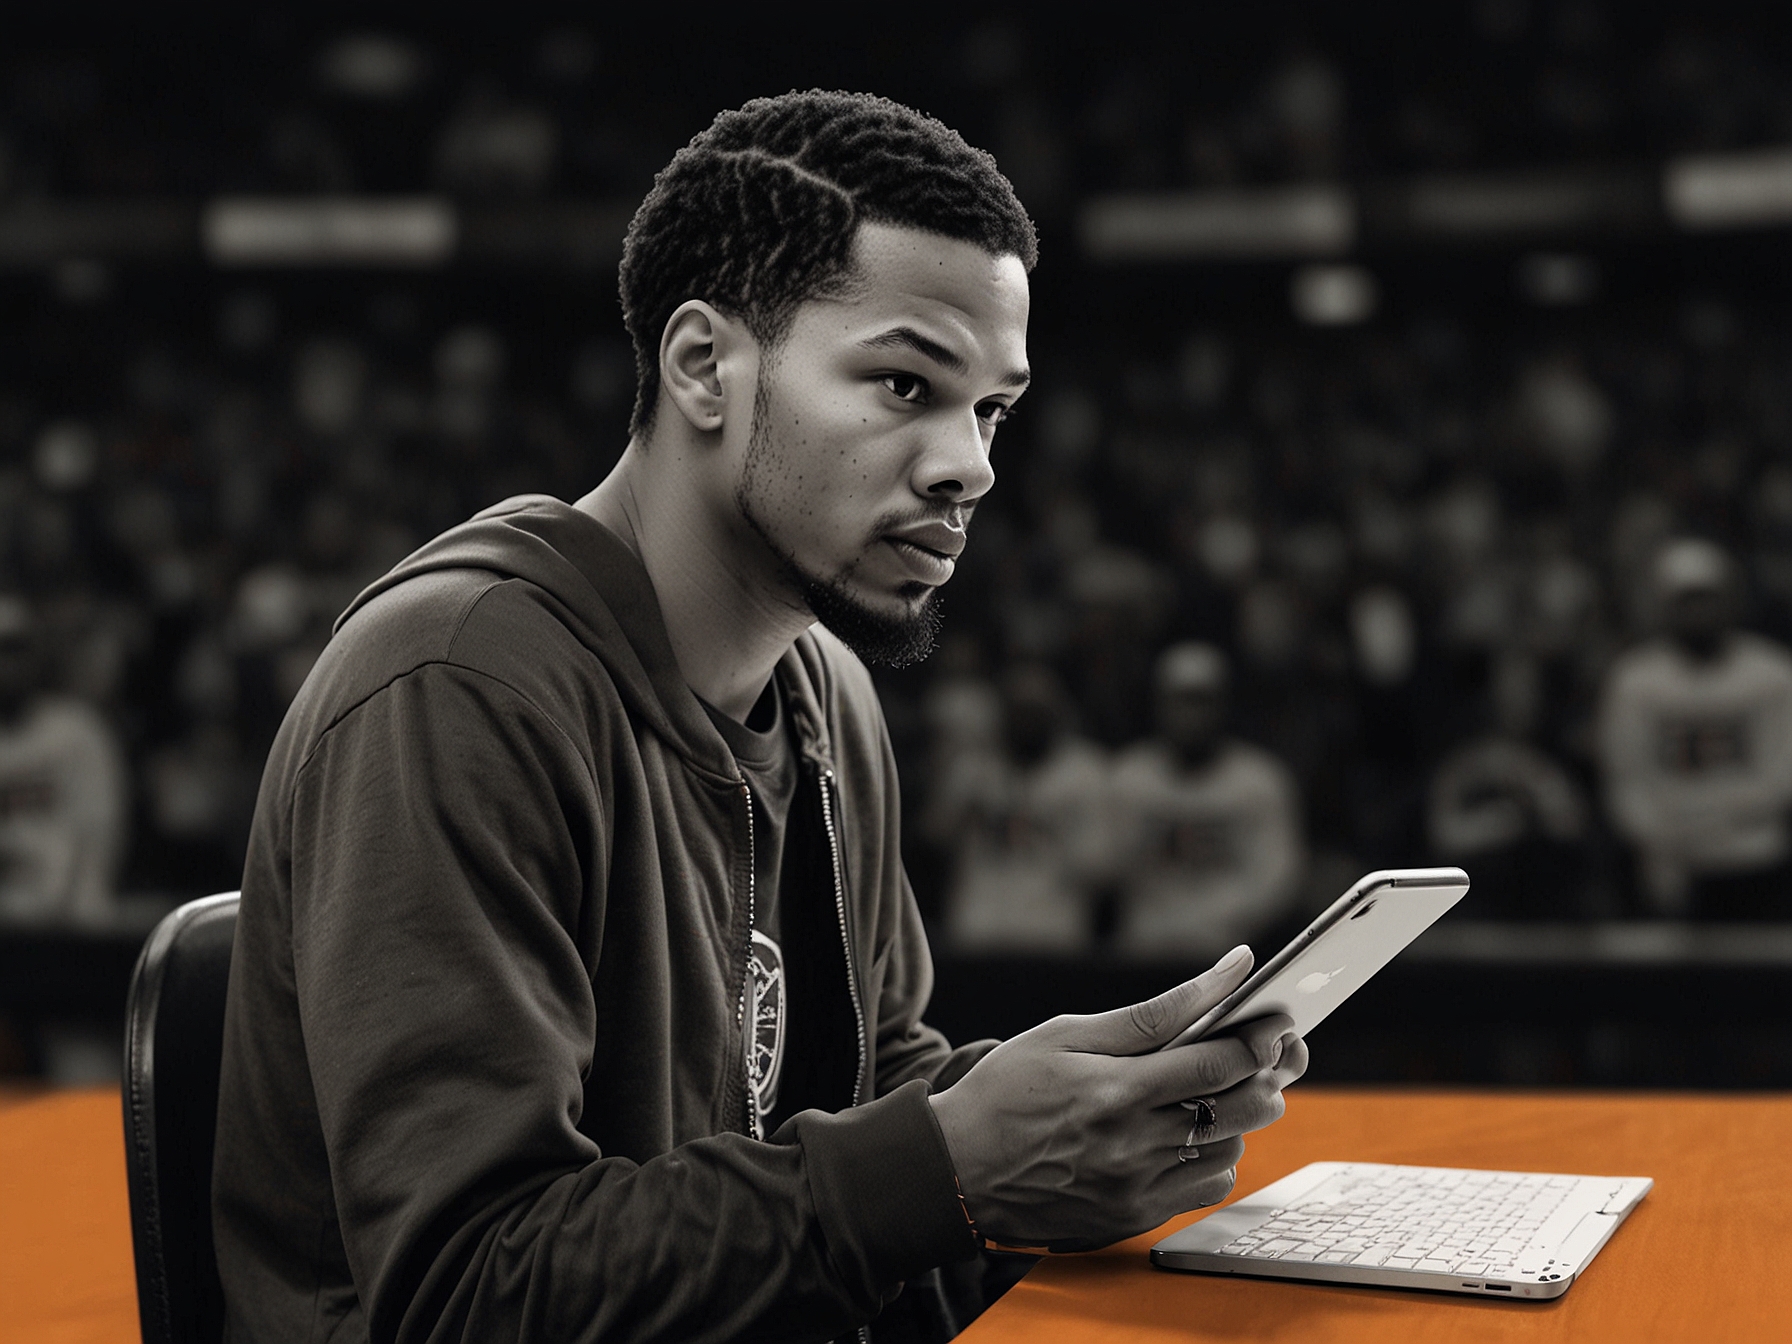 Mat Ishbia confidently typing on his phone, about to tweet his statement denying the Kevin Durant trade rumors, with a backdrop of the Phoenix Suns logo.